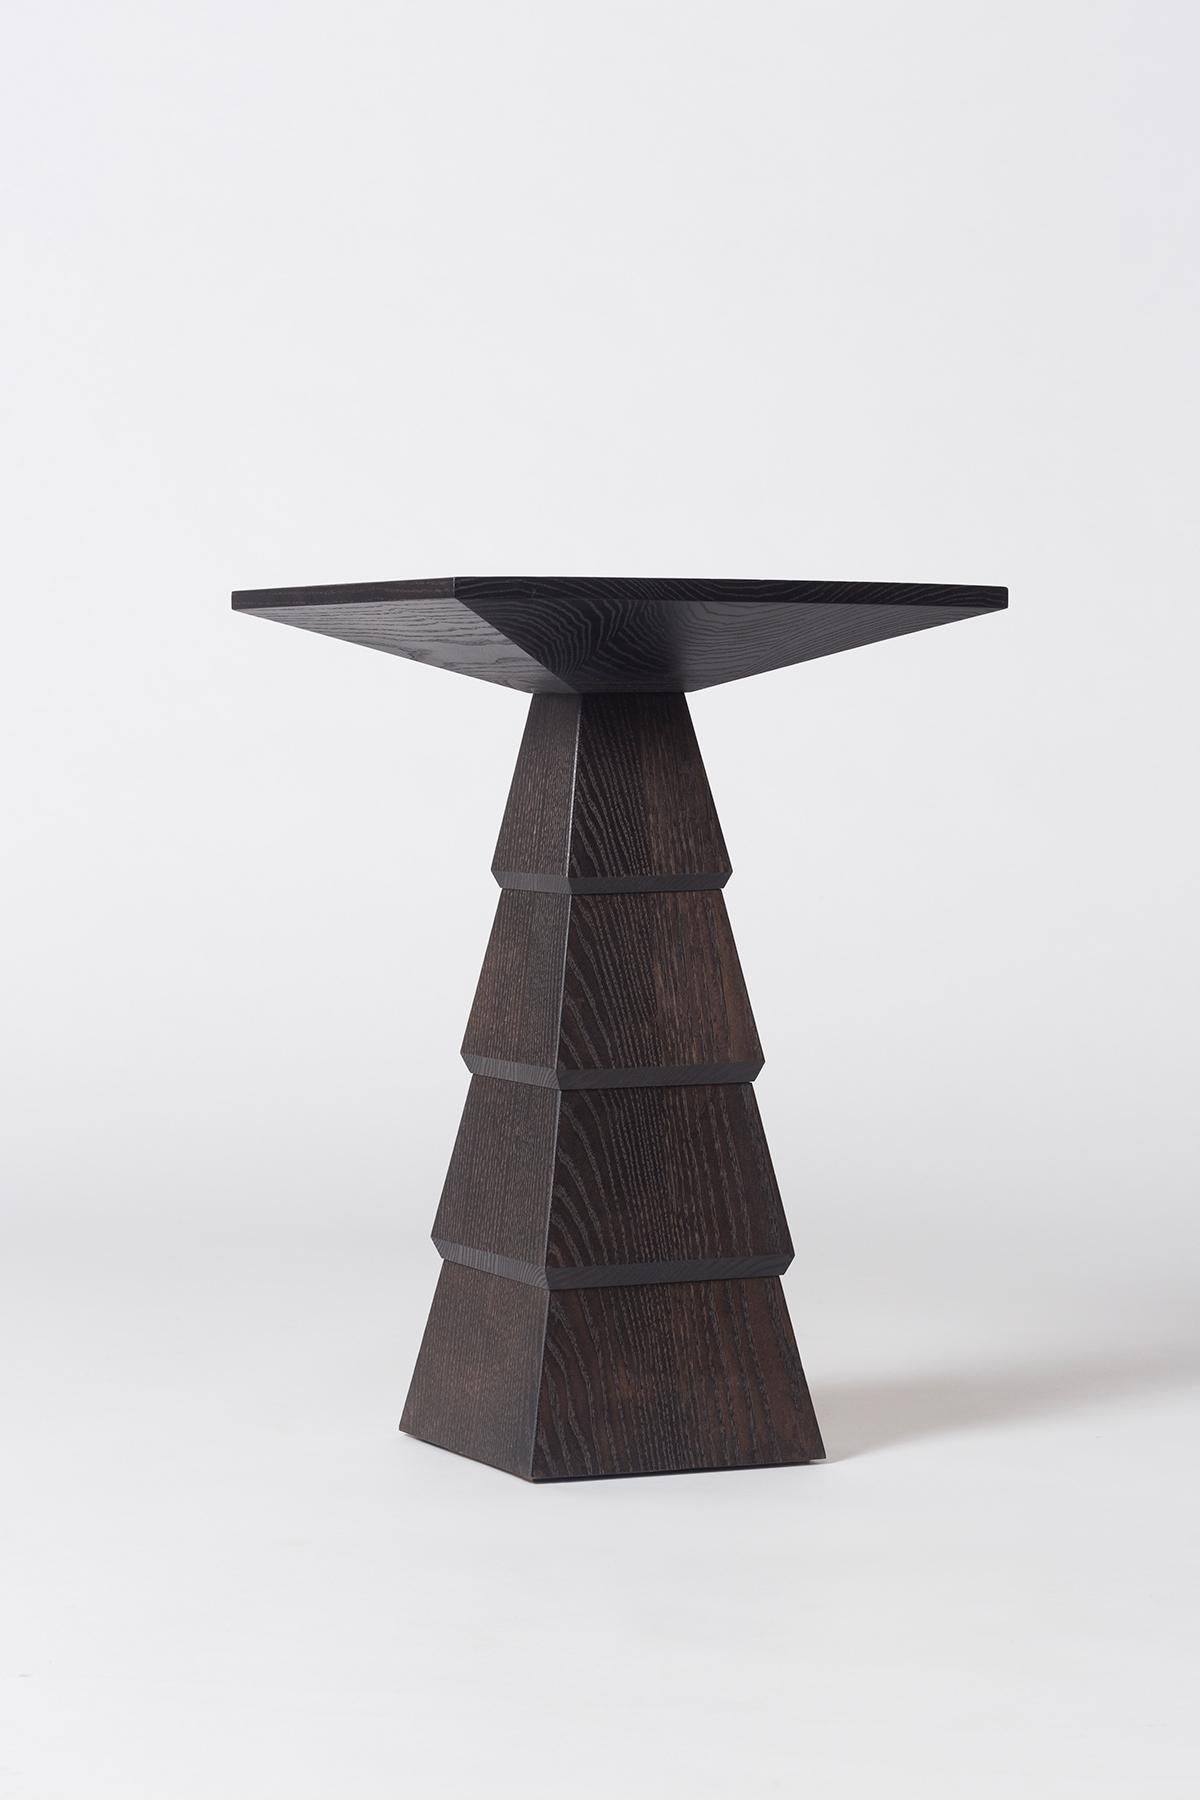 Measures: L 16in (41cm) x W 16in (41cm) x H 24in (61cm).

Inspired by the architecture of Frank Lloyd Wright, the Meso tables are Brutalist in shape with rich and contrasting woods. Available in ebonized ash.